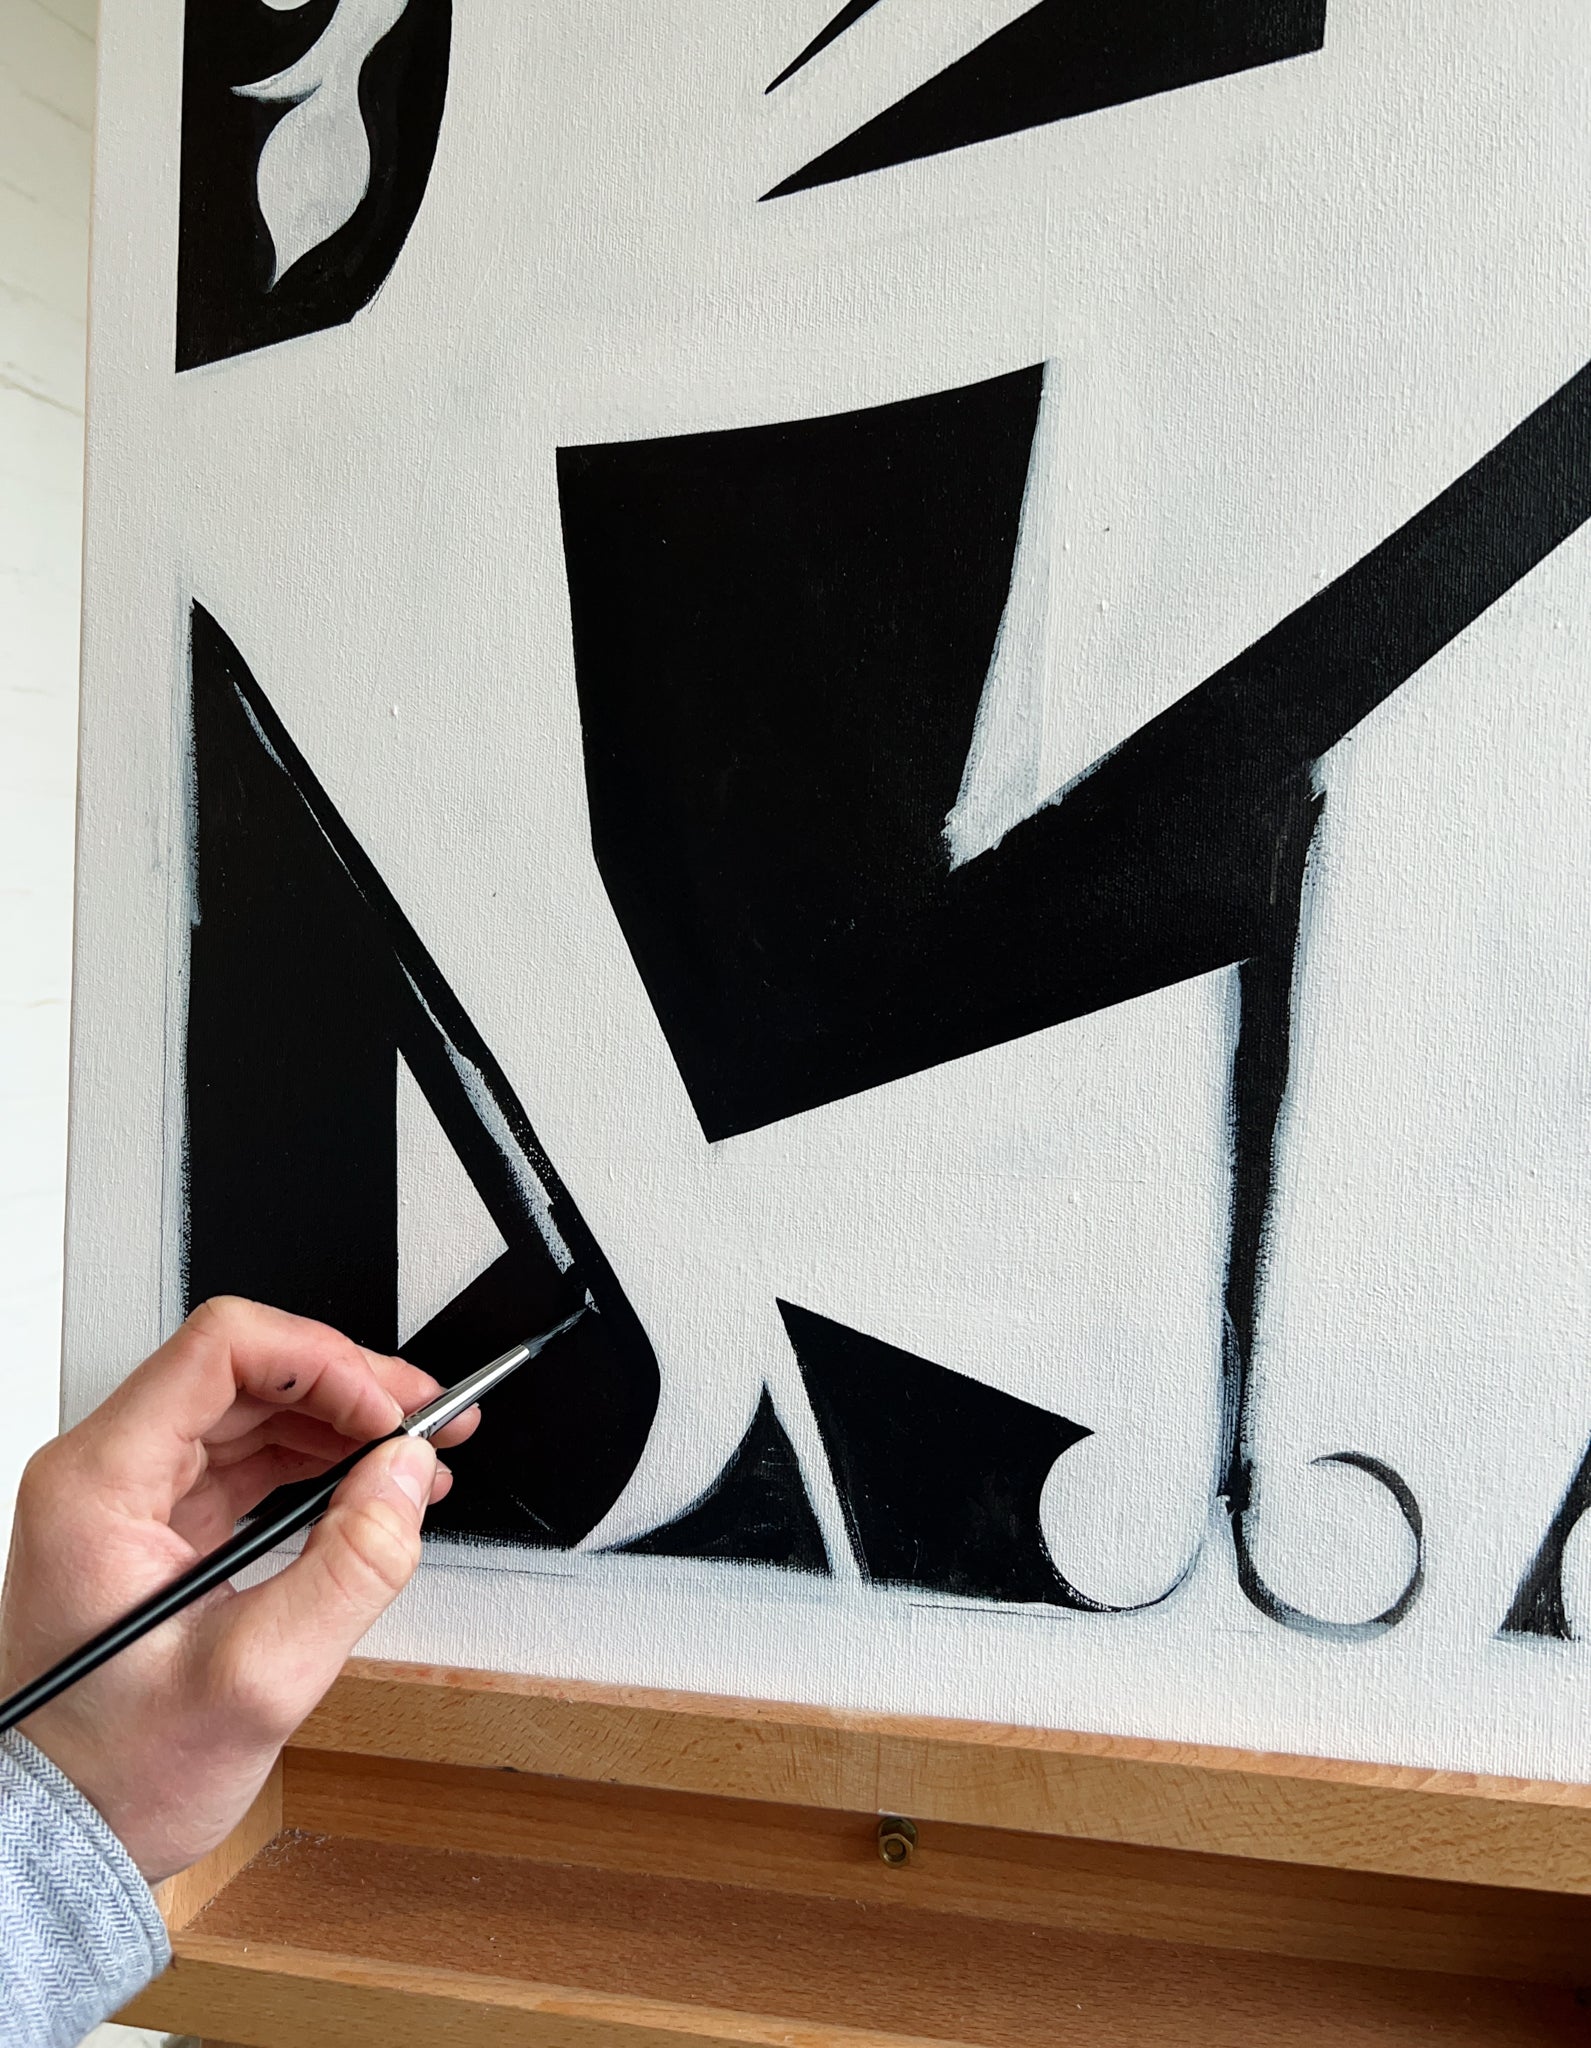 Black and white abstract artwork in progress on canvas